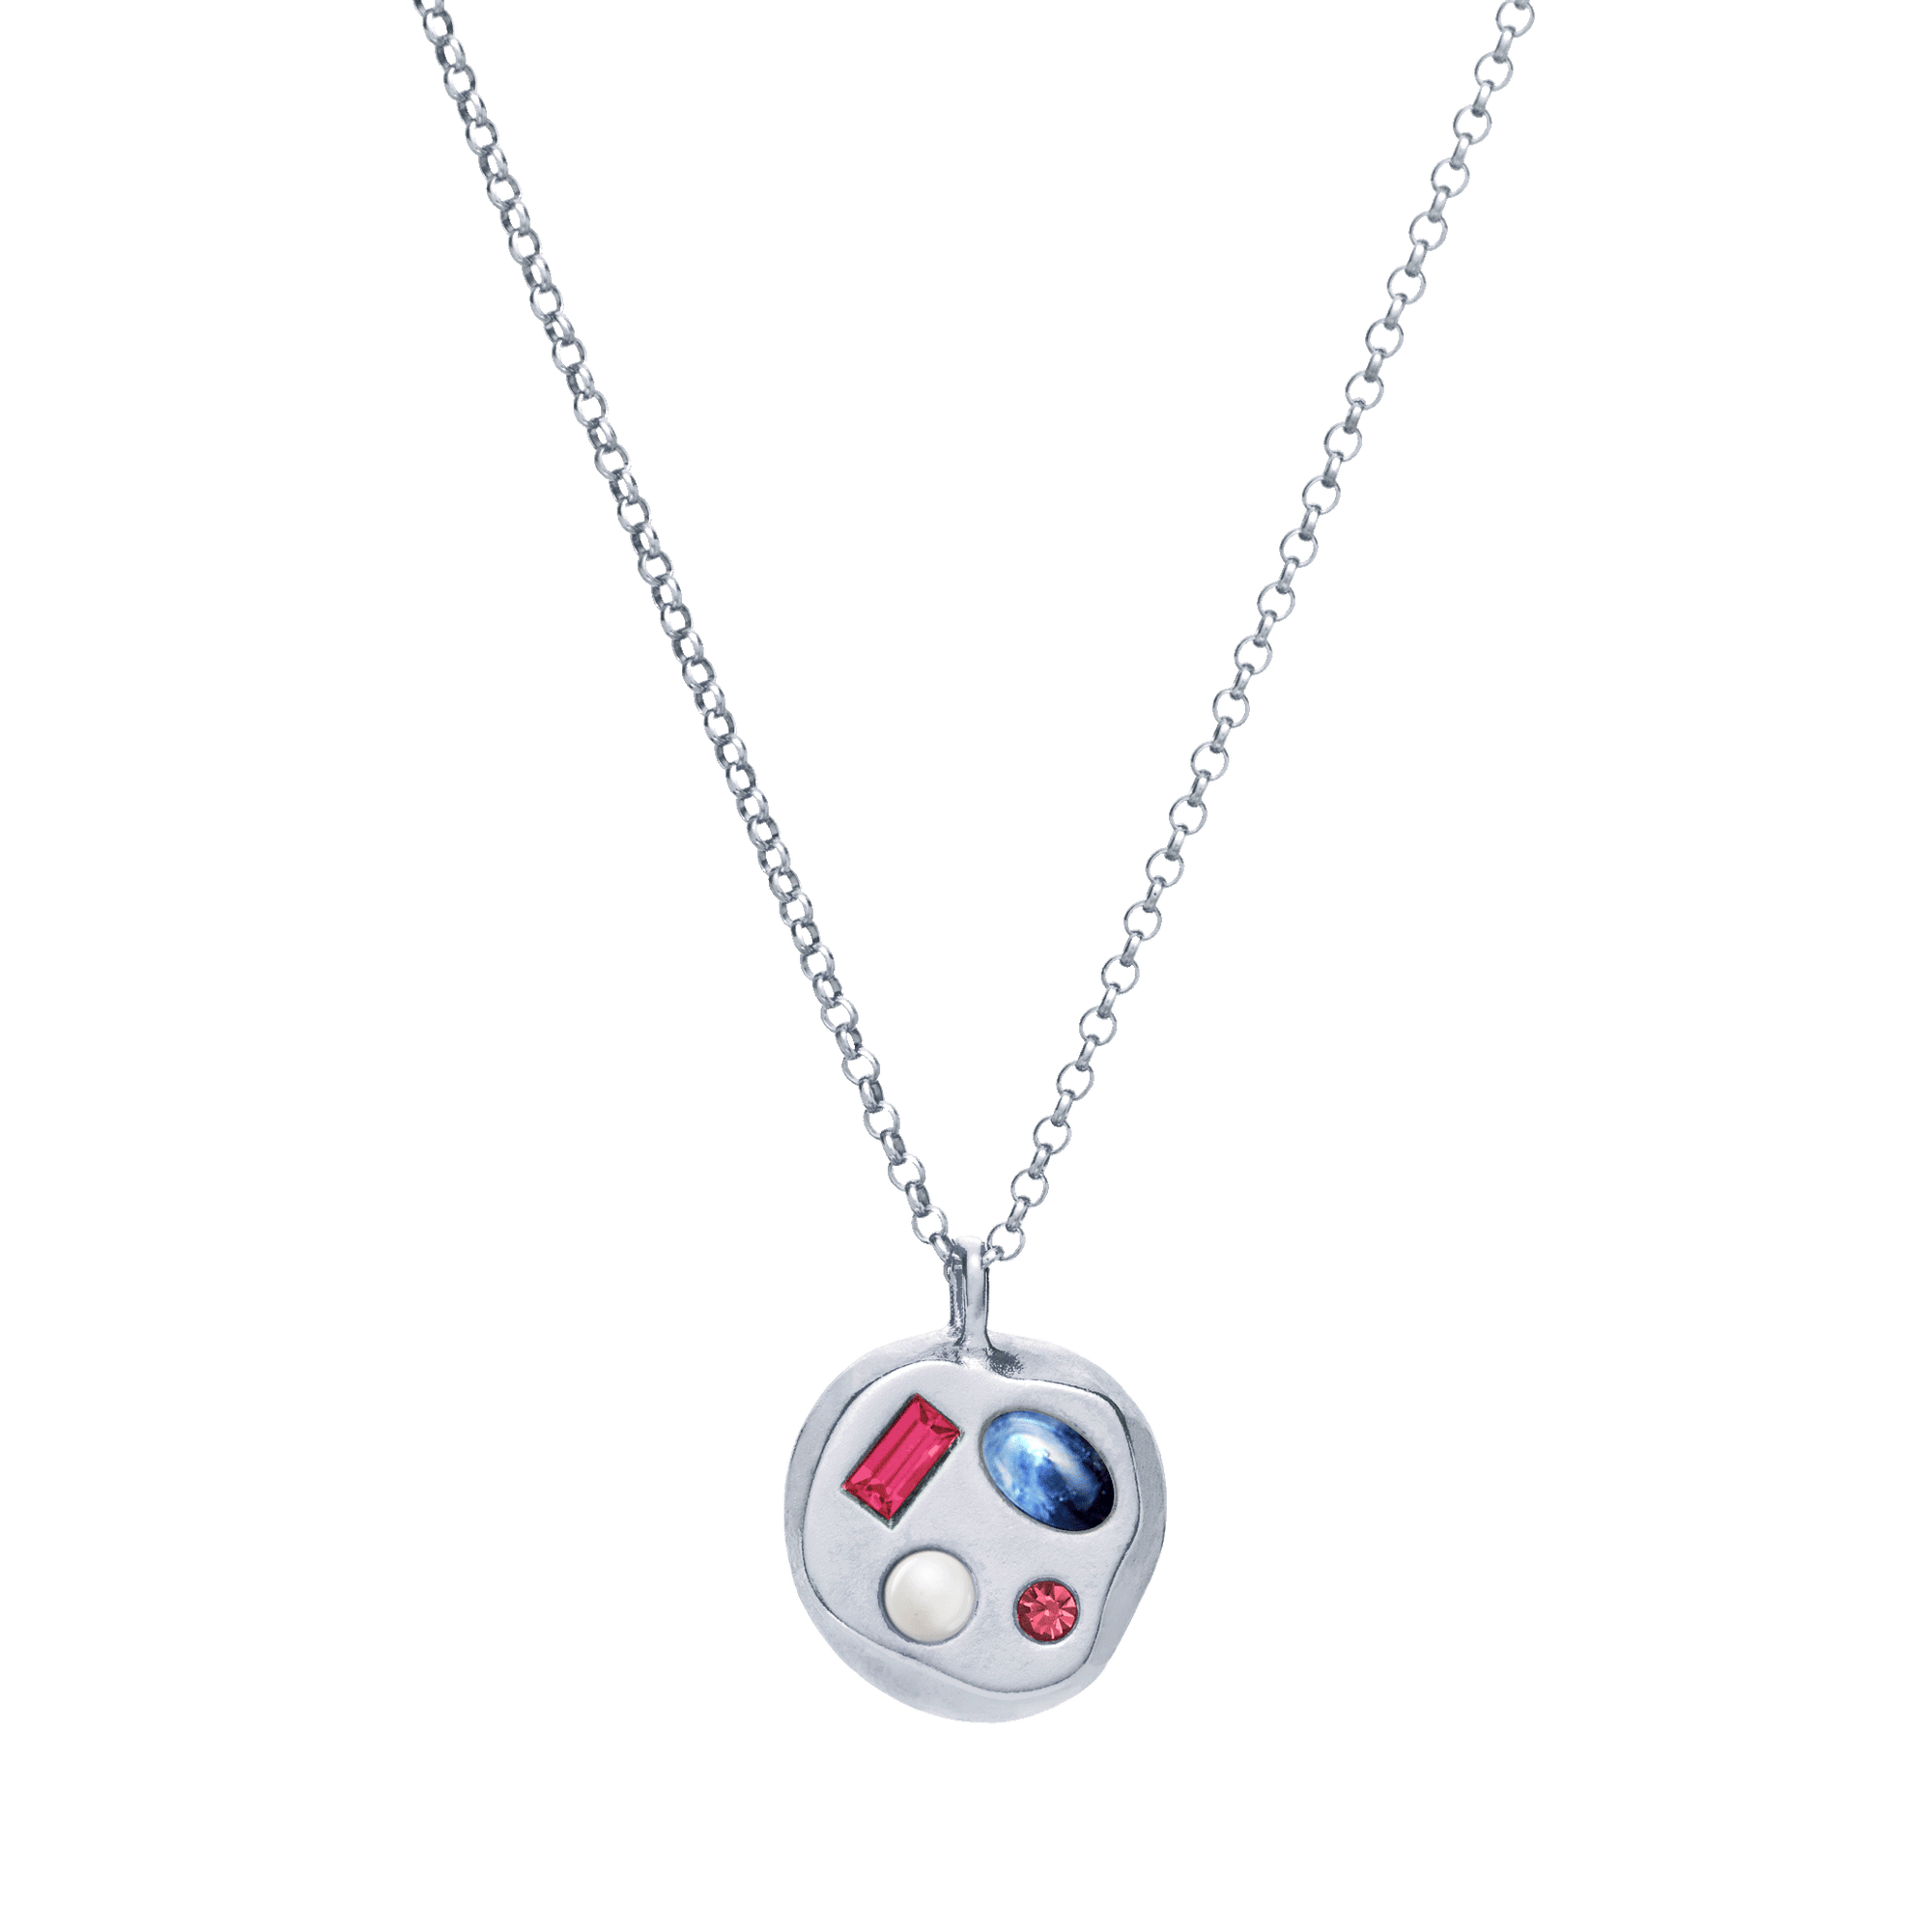 The July Nineteenth Pendant in Sterling Silver